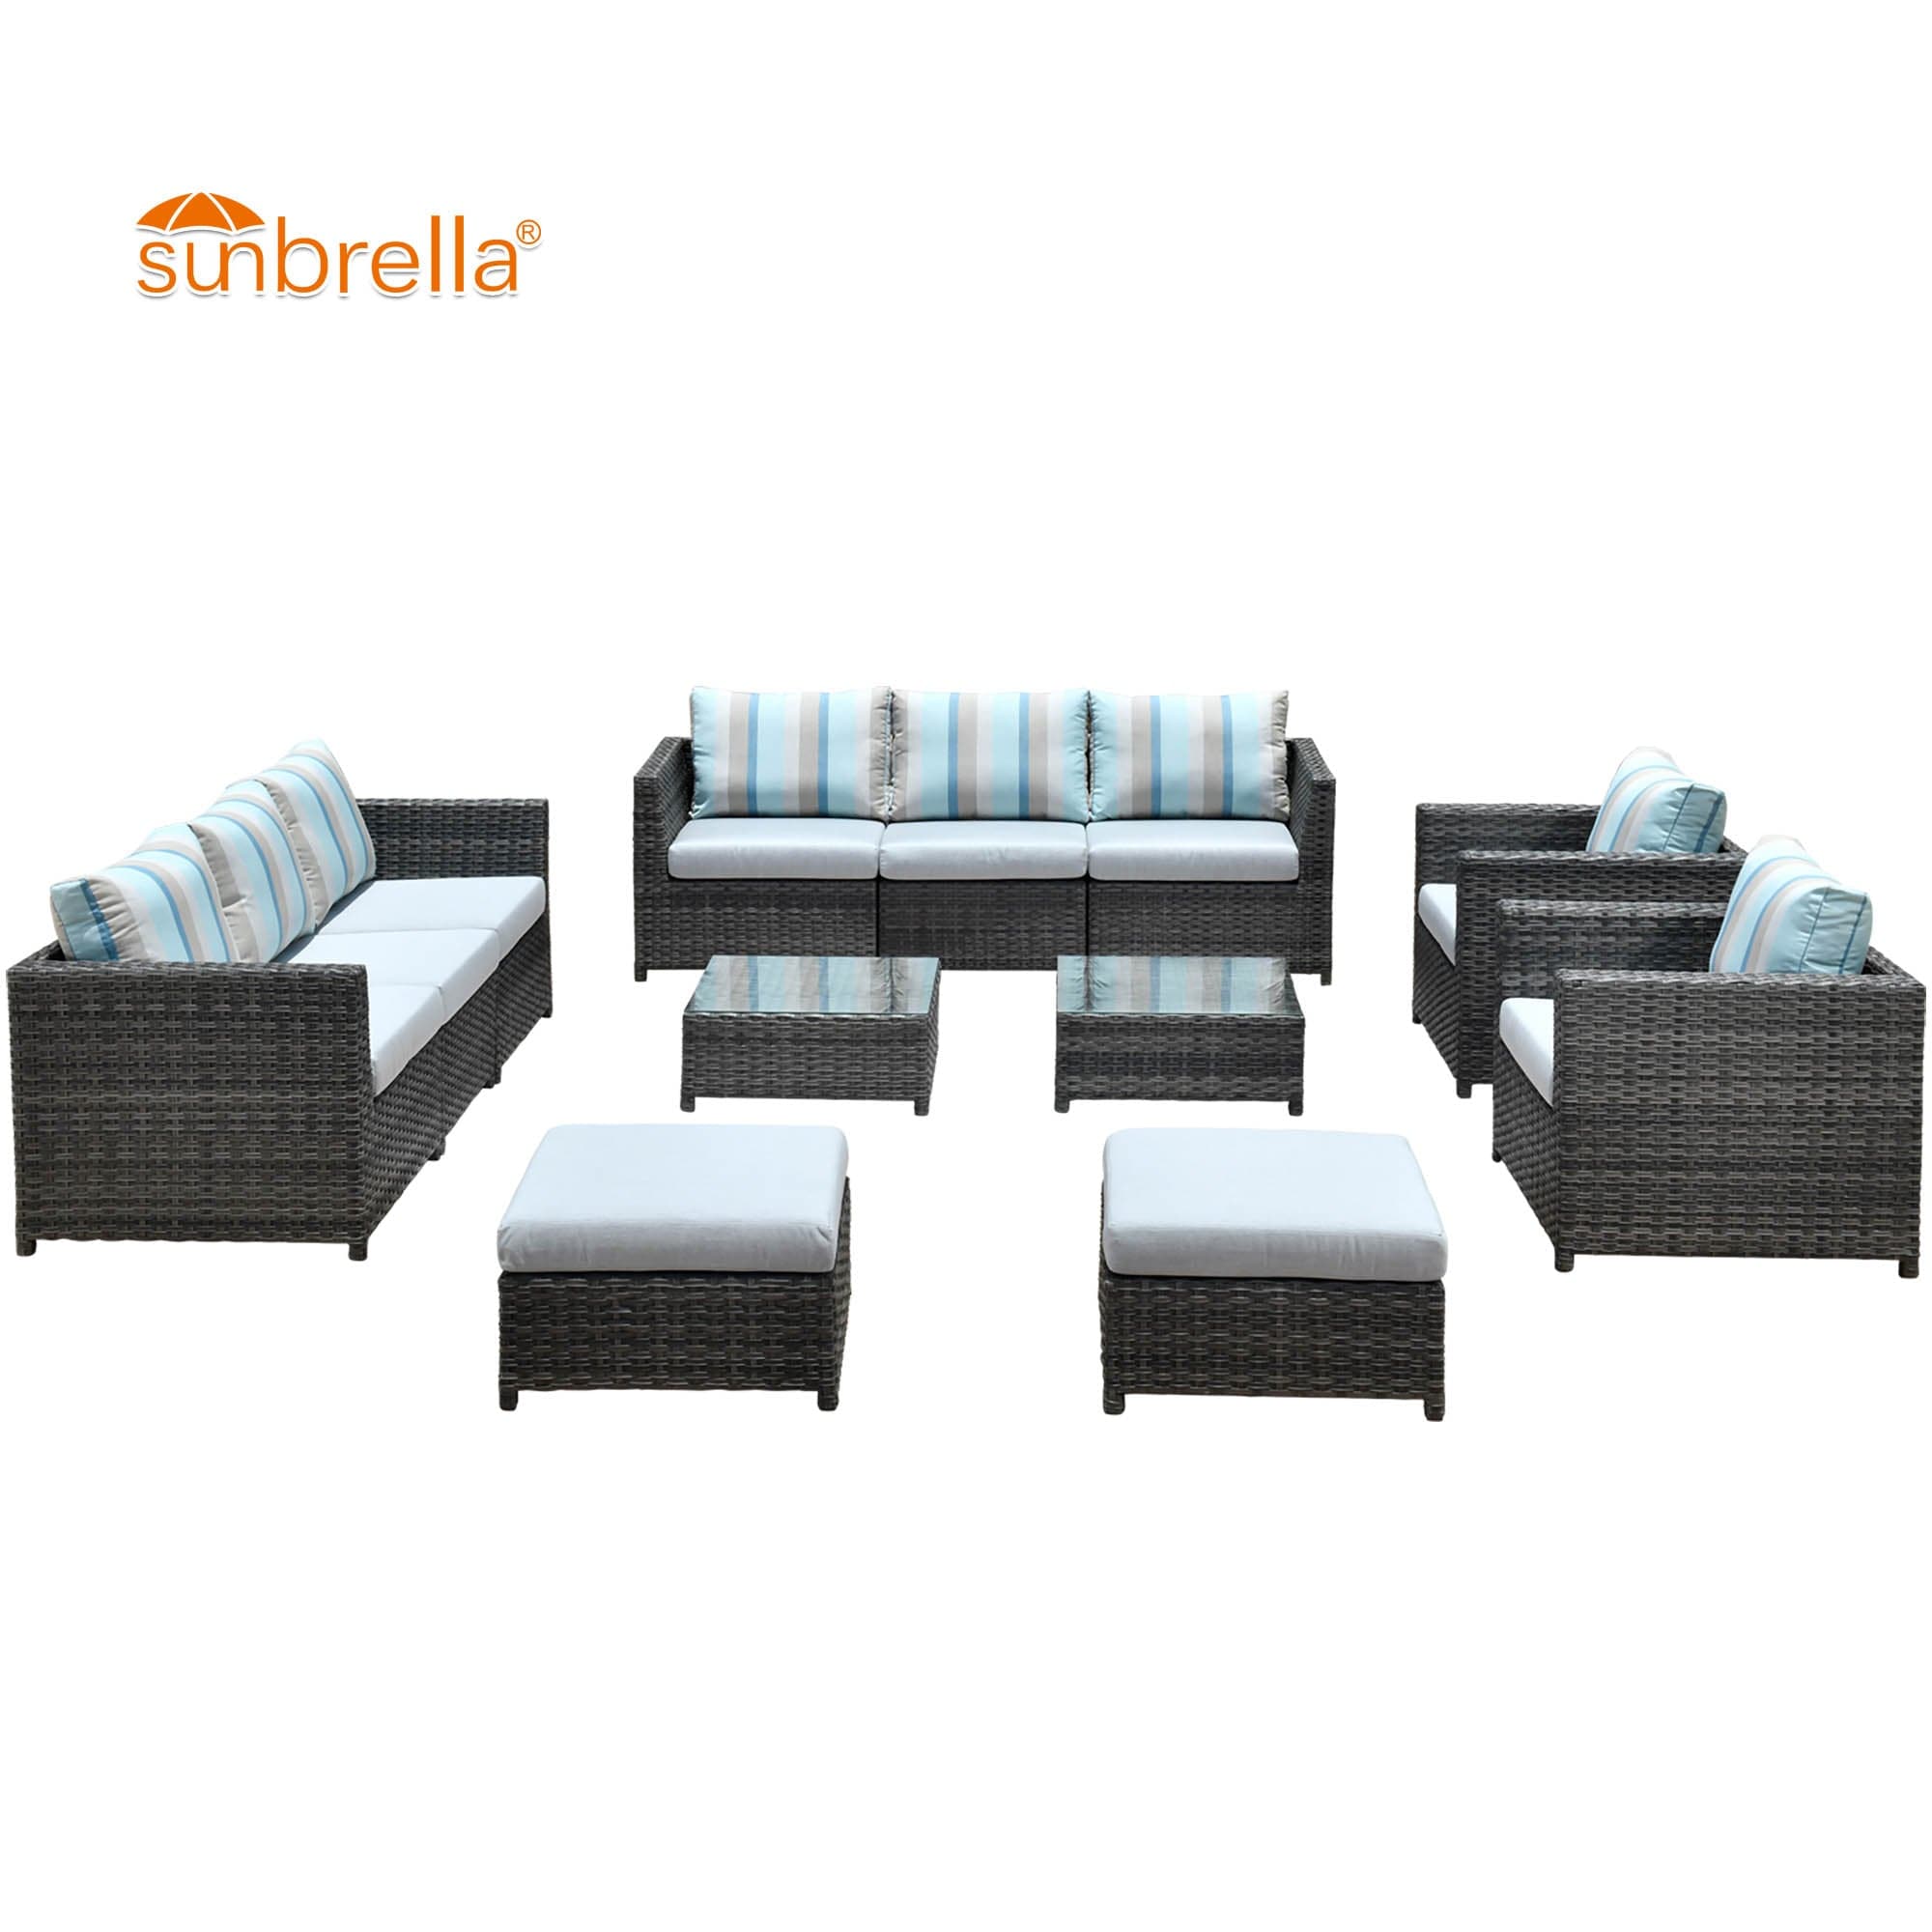 Ovios Patio Furniture Set Bigger Size 12-Piece with Grey Sunbrella, King Series, Fully Assembled